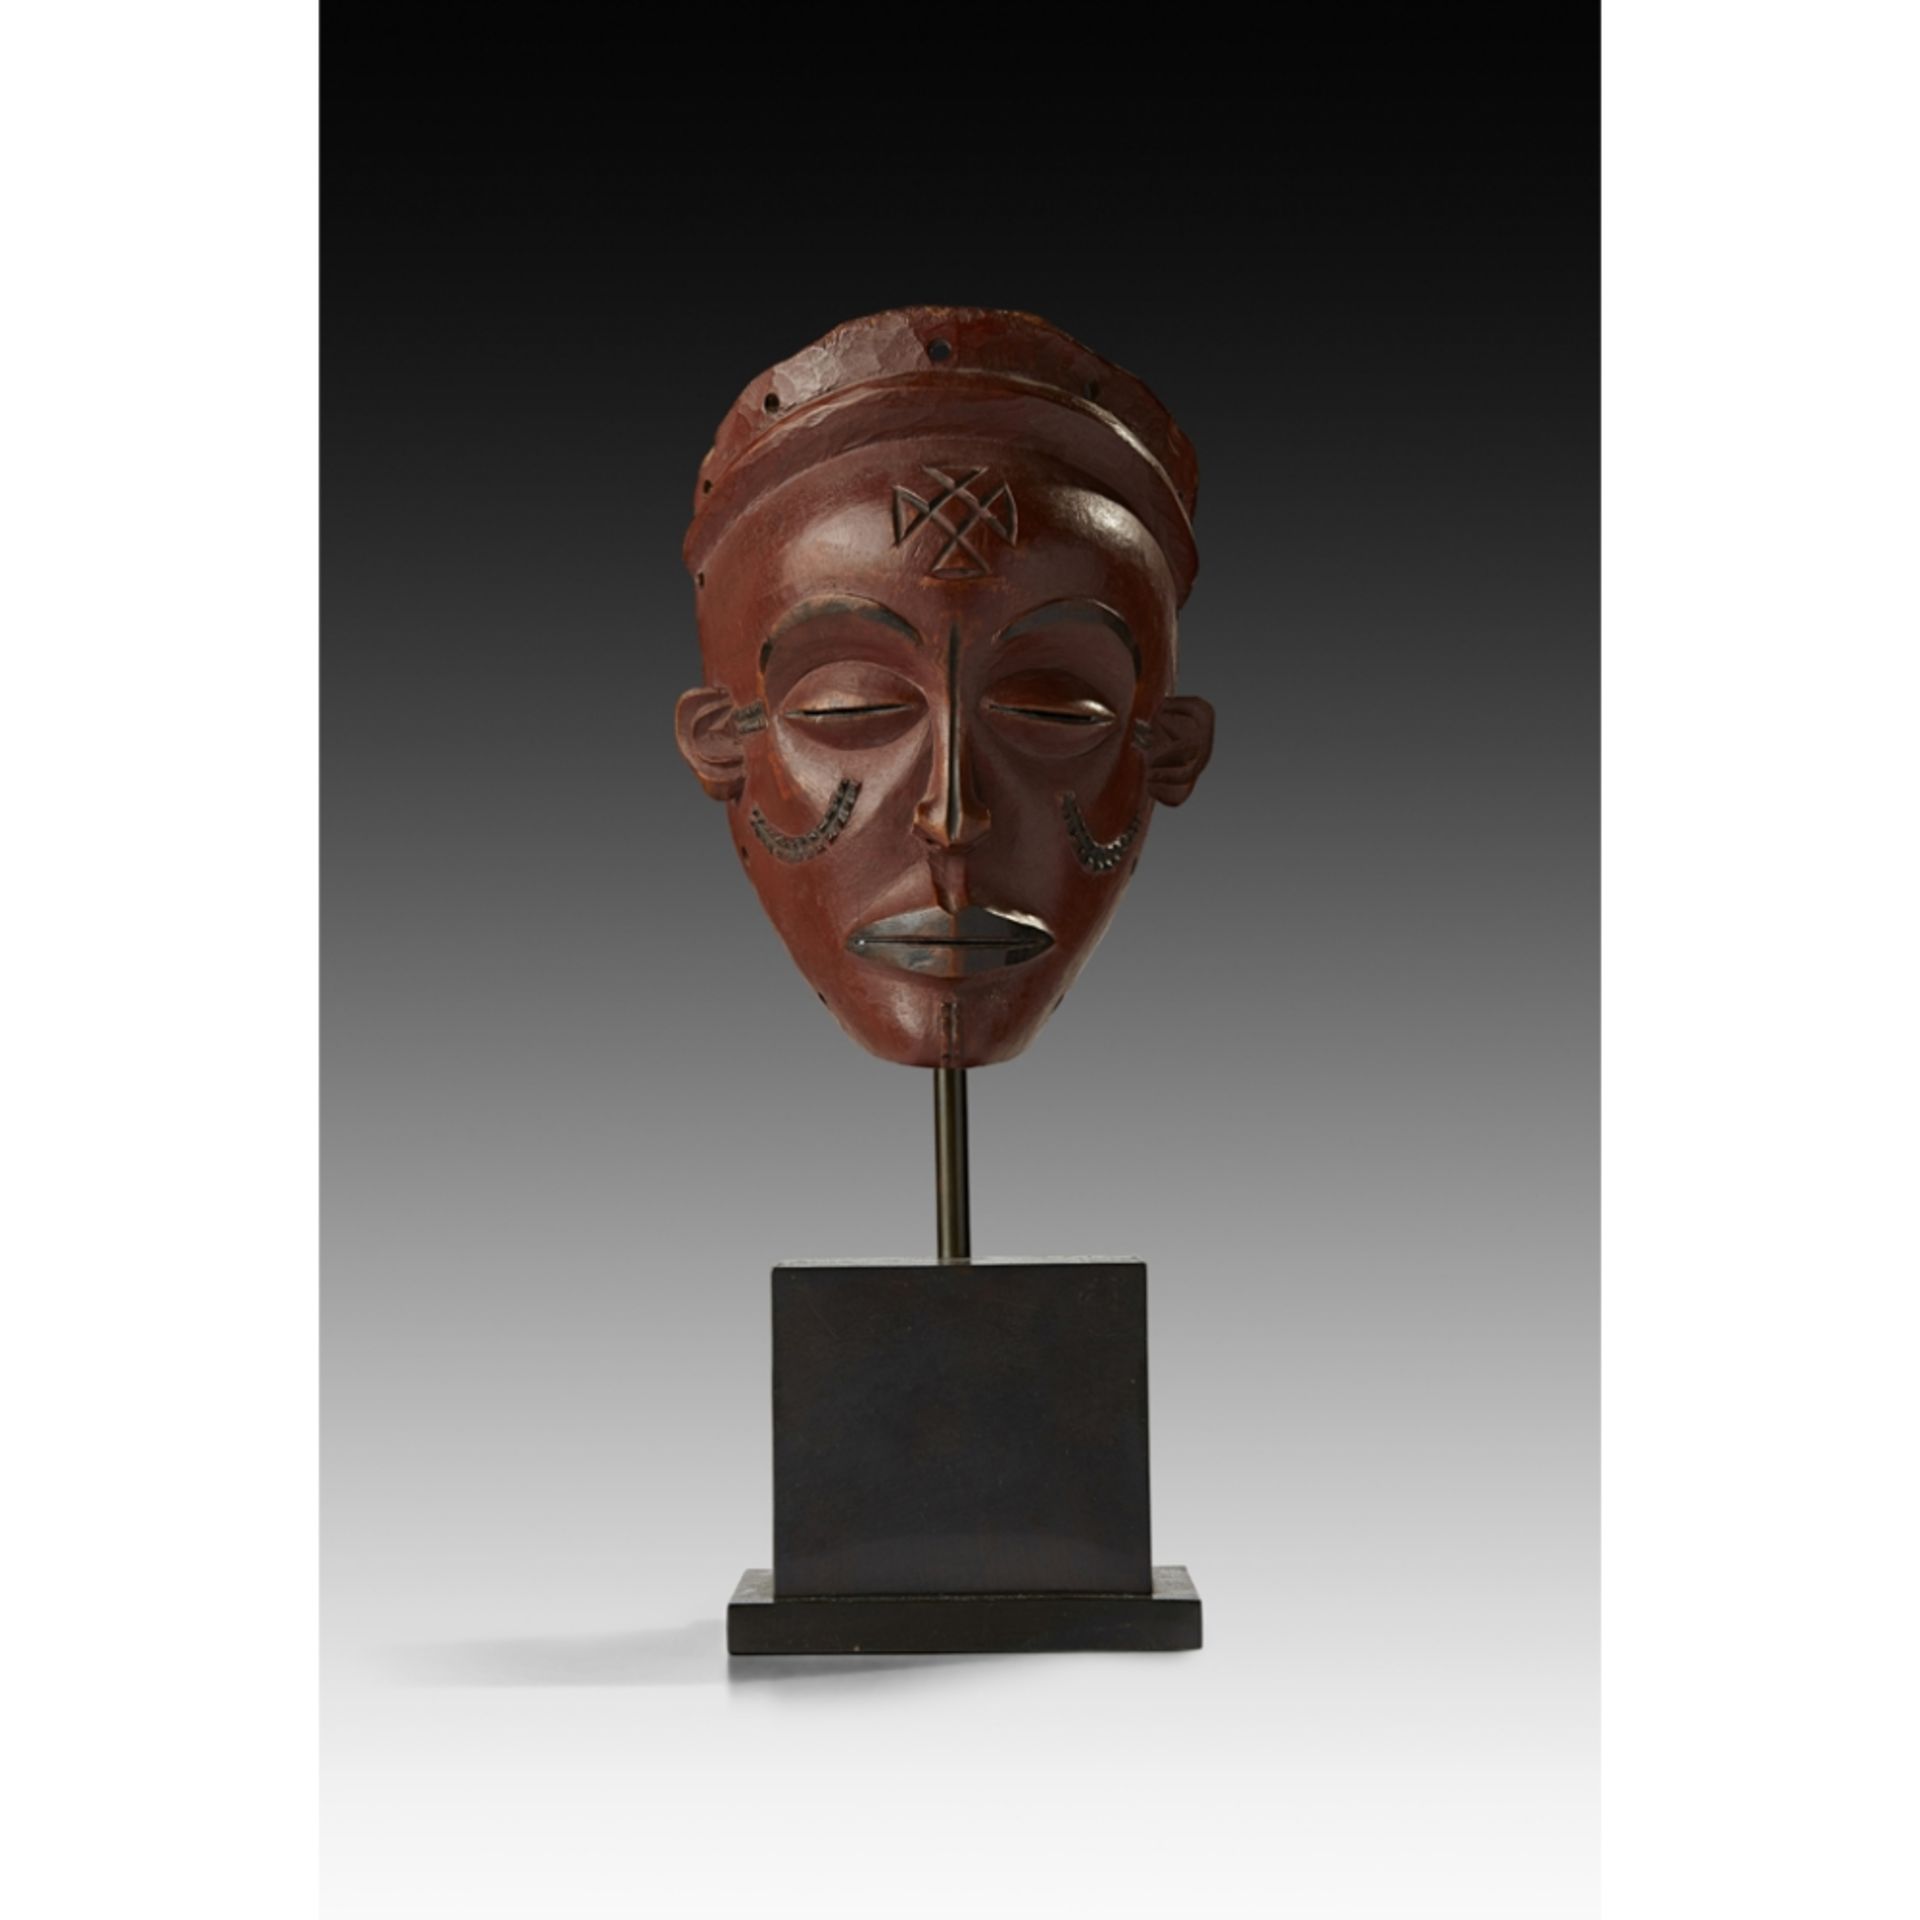 CHOKWE MASK, PWOANGOLA carved wood, the softly curving chin below fractionally parted lips, a medial - Image 6 of 6